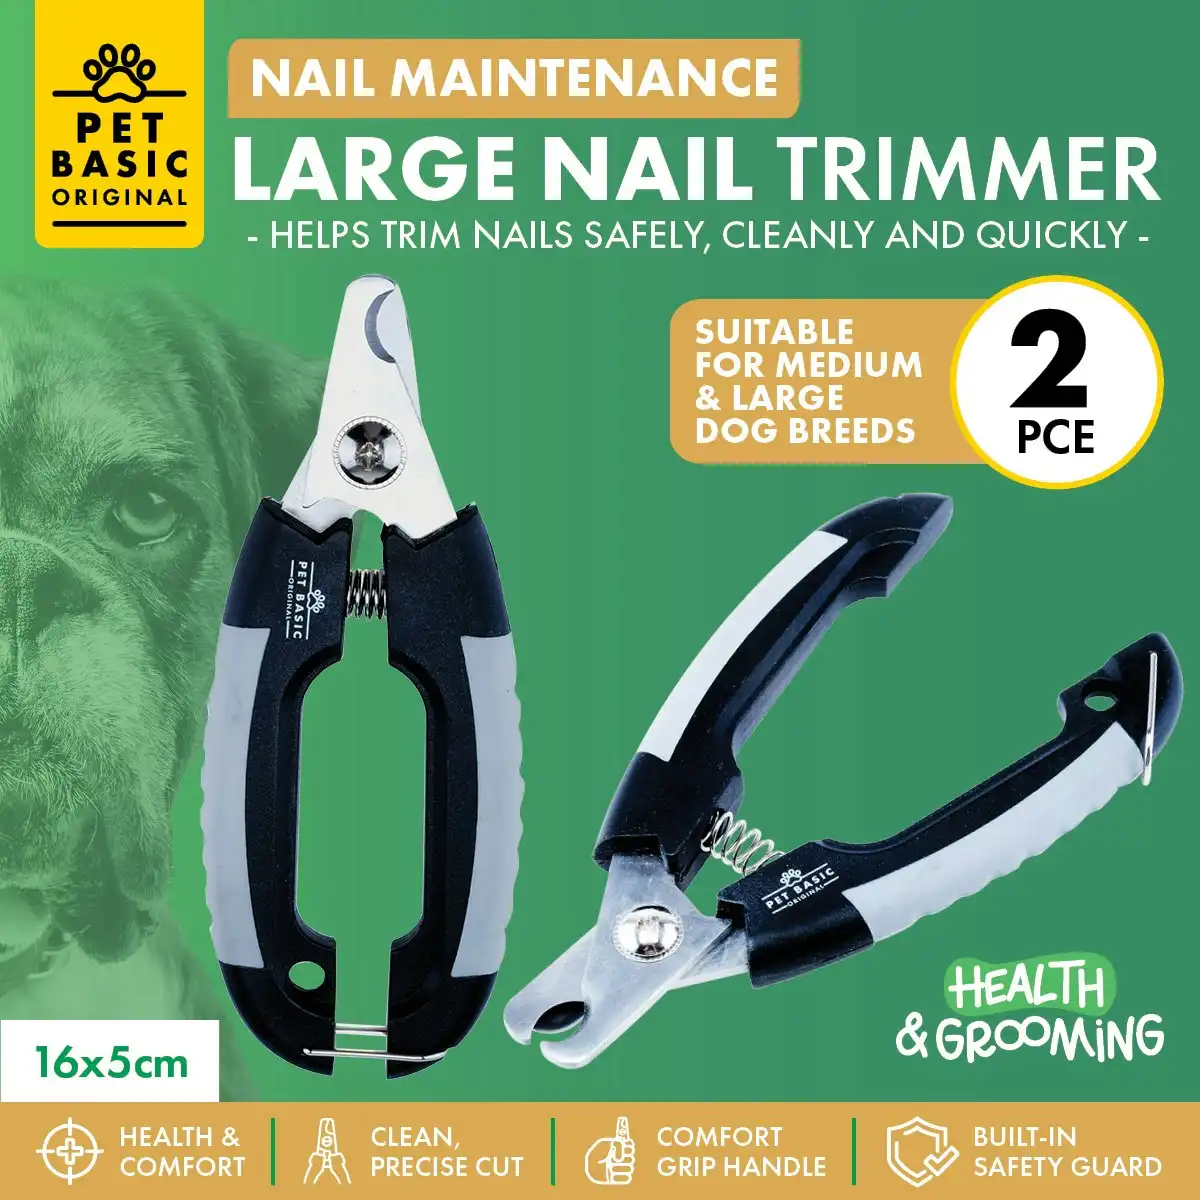 Pet Basic 2PCE Nail Trimmers Medium/Large Breeds Built-In Safety Guard 16cm